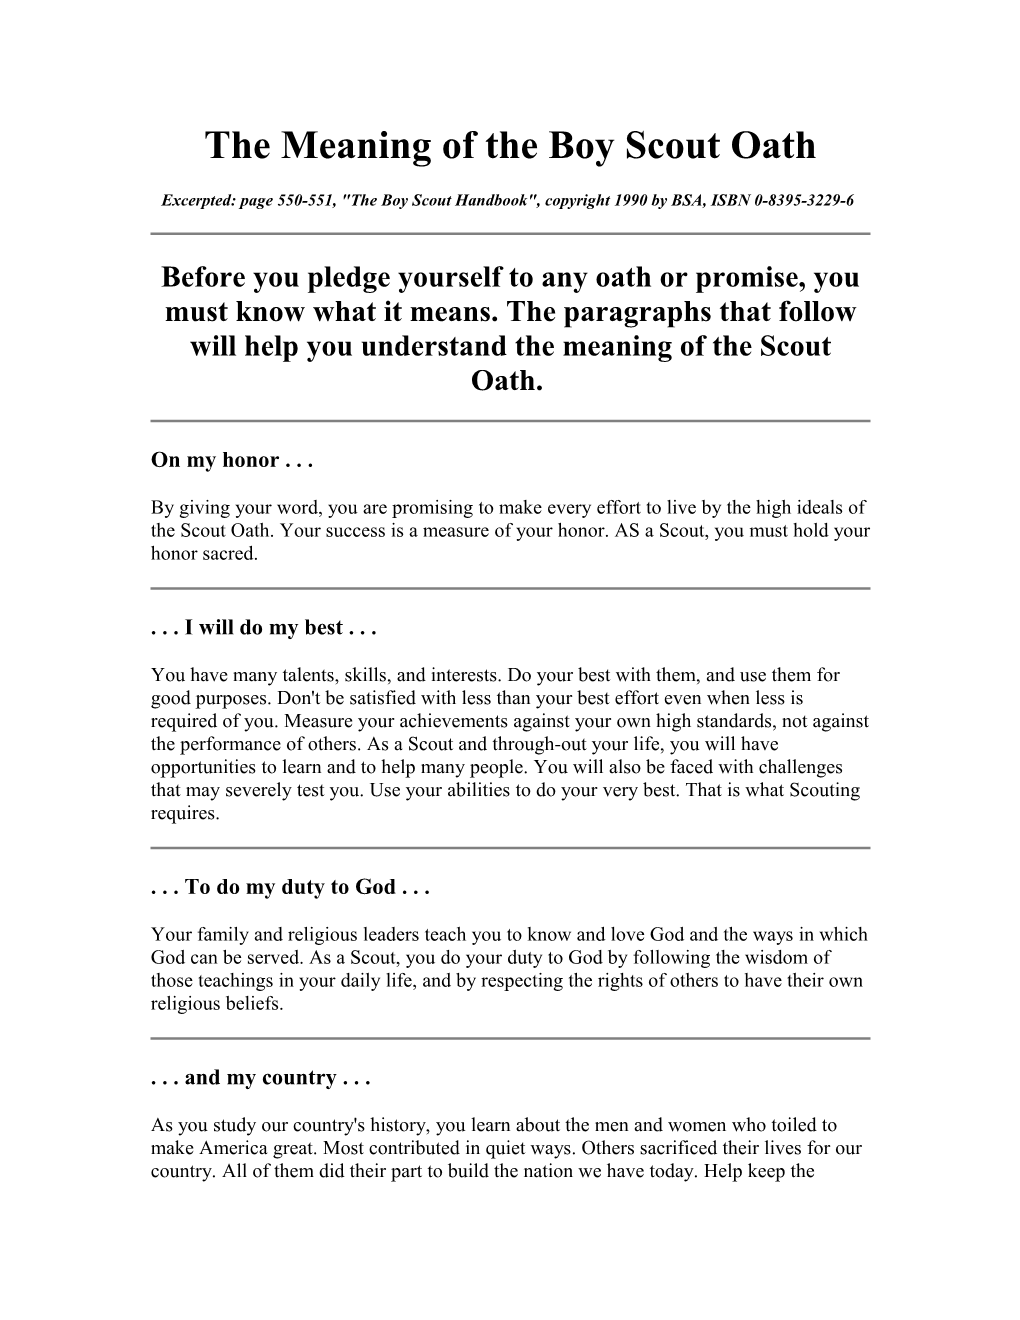 The Meaning of the Boy Scout Oath